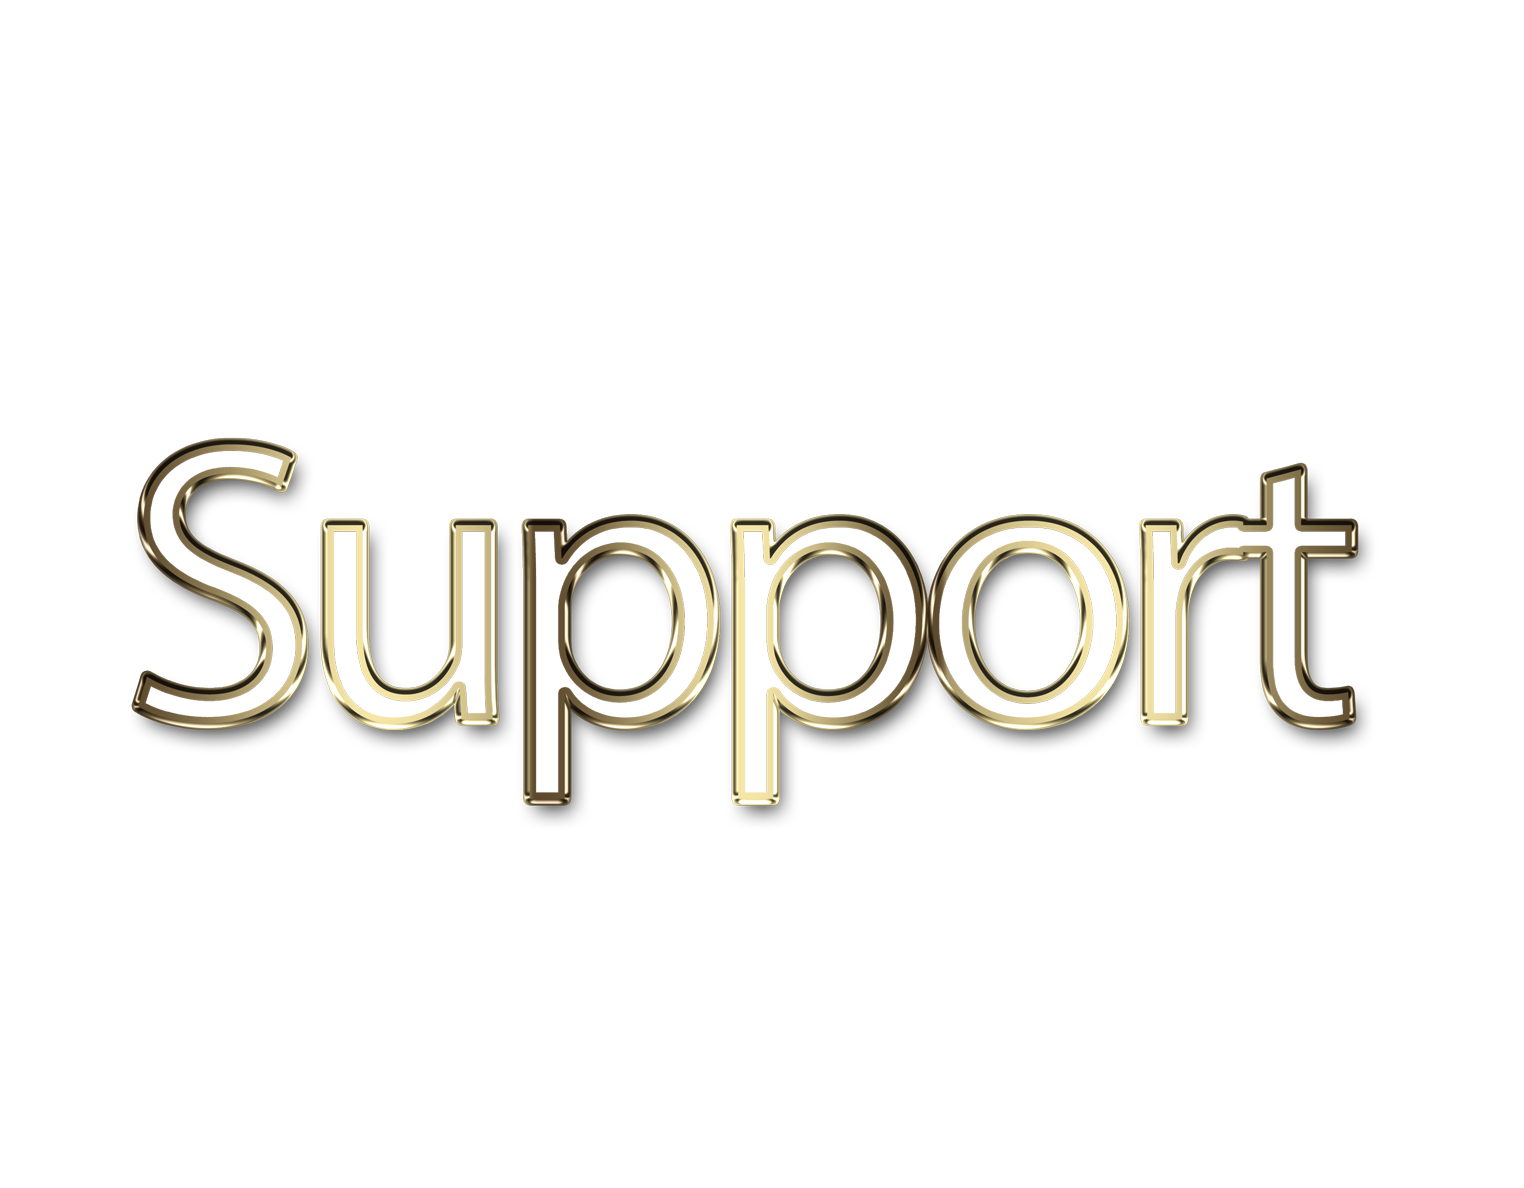 Support png, word Support png, Support word png, Support text png, Support letters png, Support word art typography PNG images, transparent png